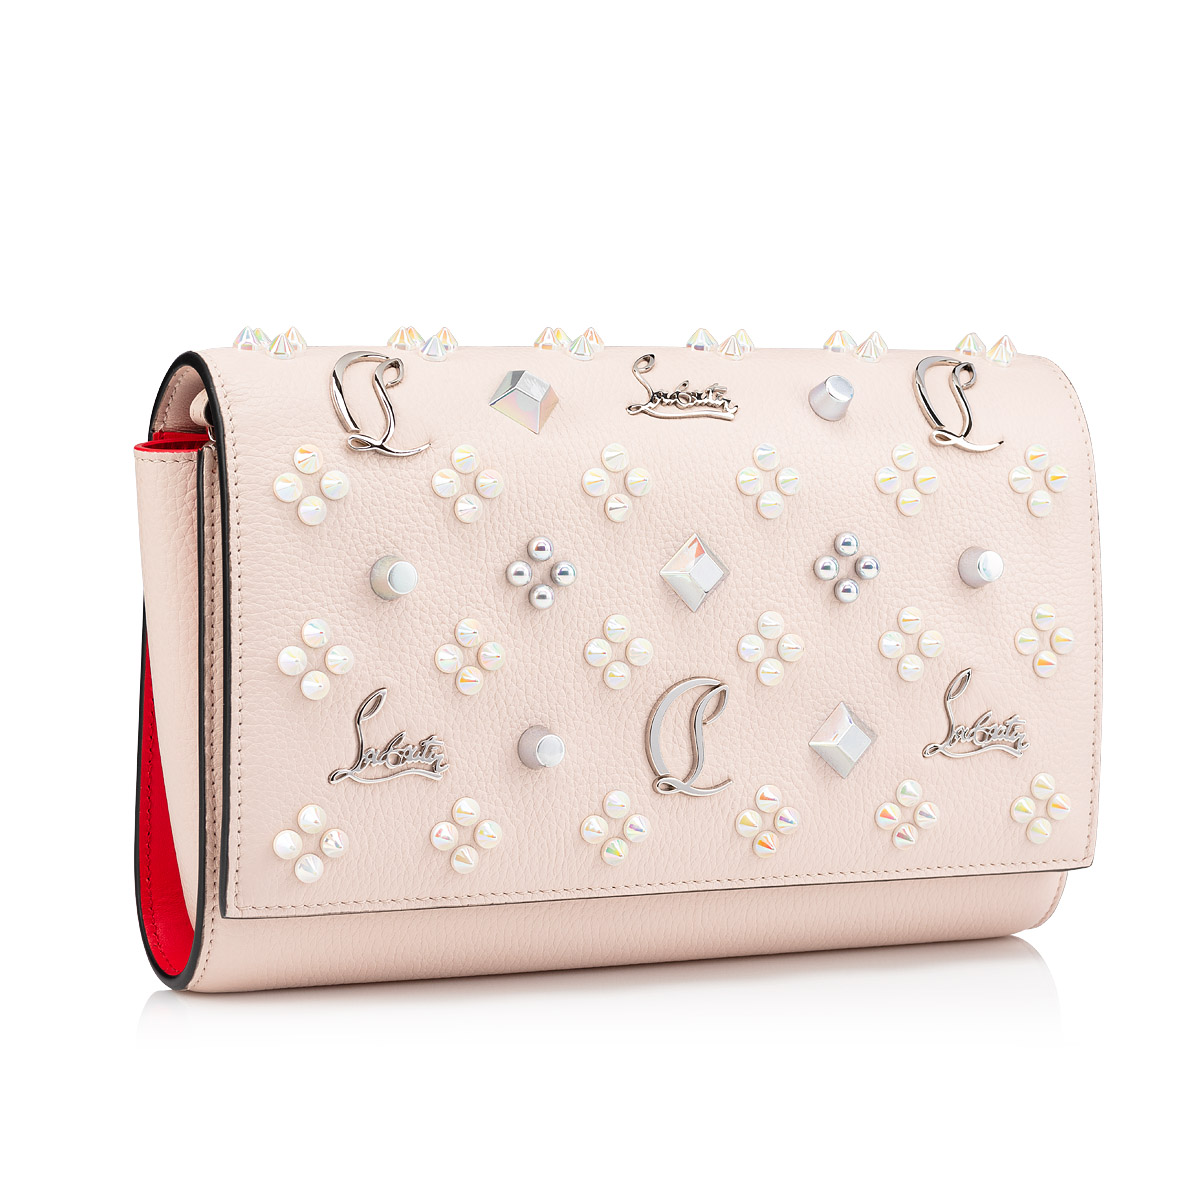 Christian Louboutin Paloma Loubinthesky Leather Clutch Bag in Natural